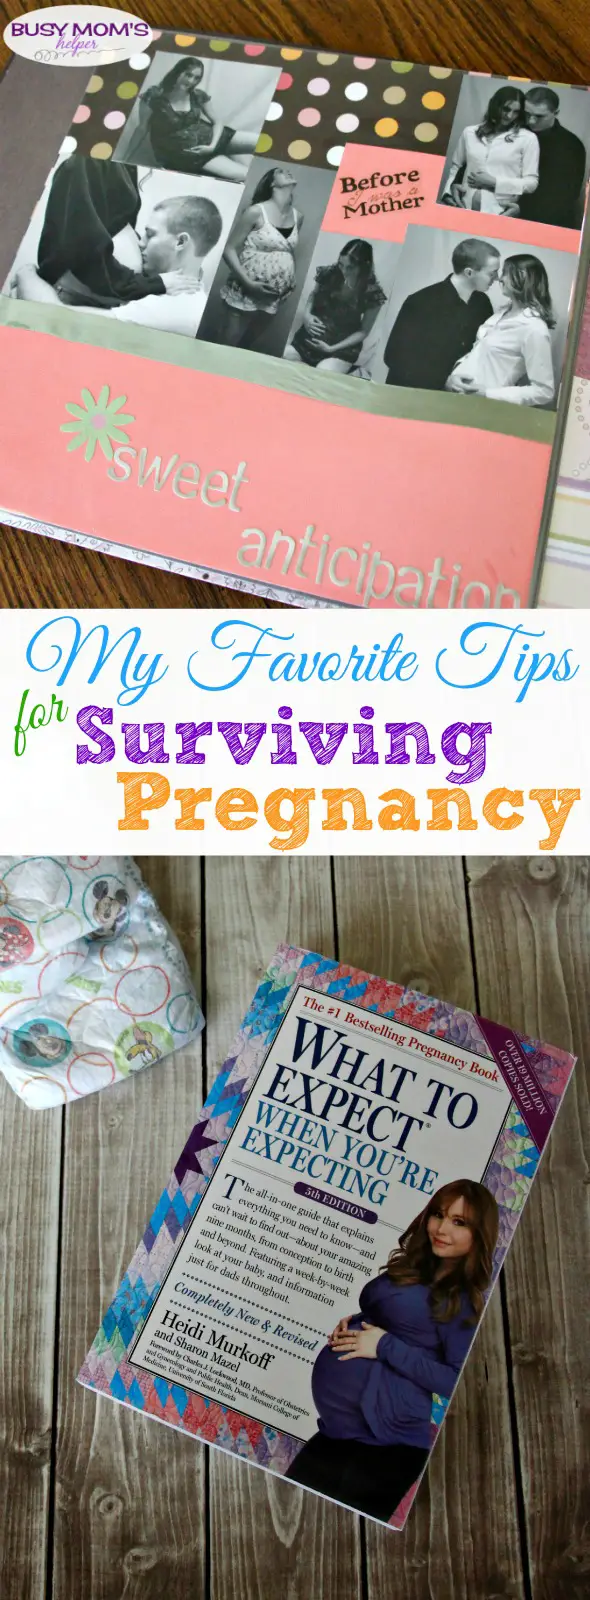 My Favorite Tips for Surviving Pregnancy #WhatToExpect #CG #ad @workmanpub 